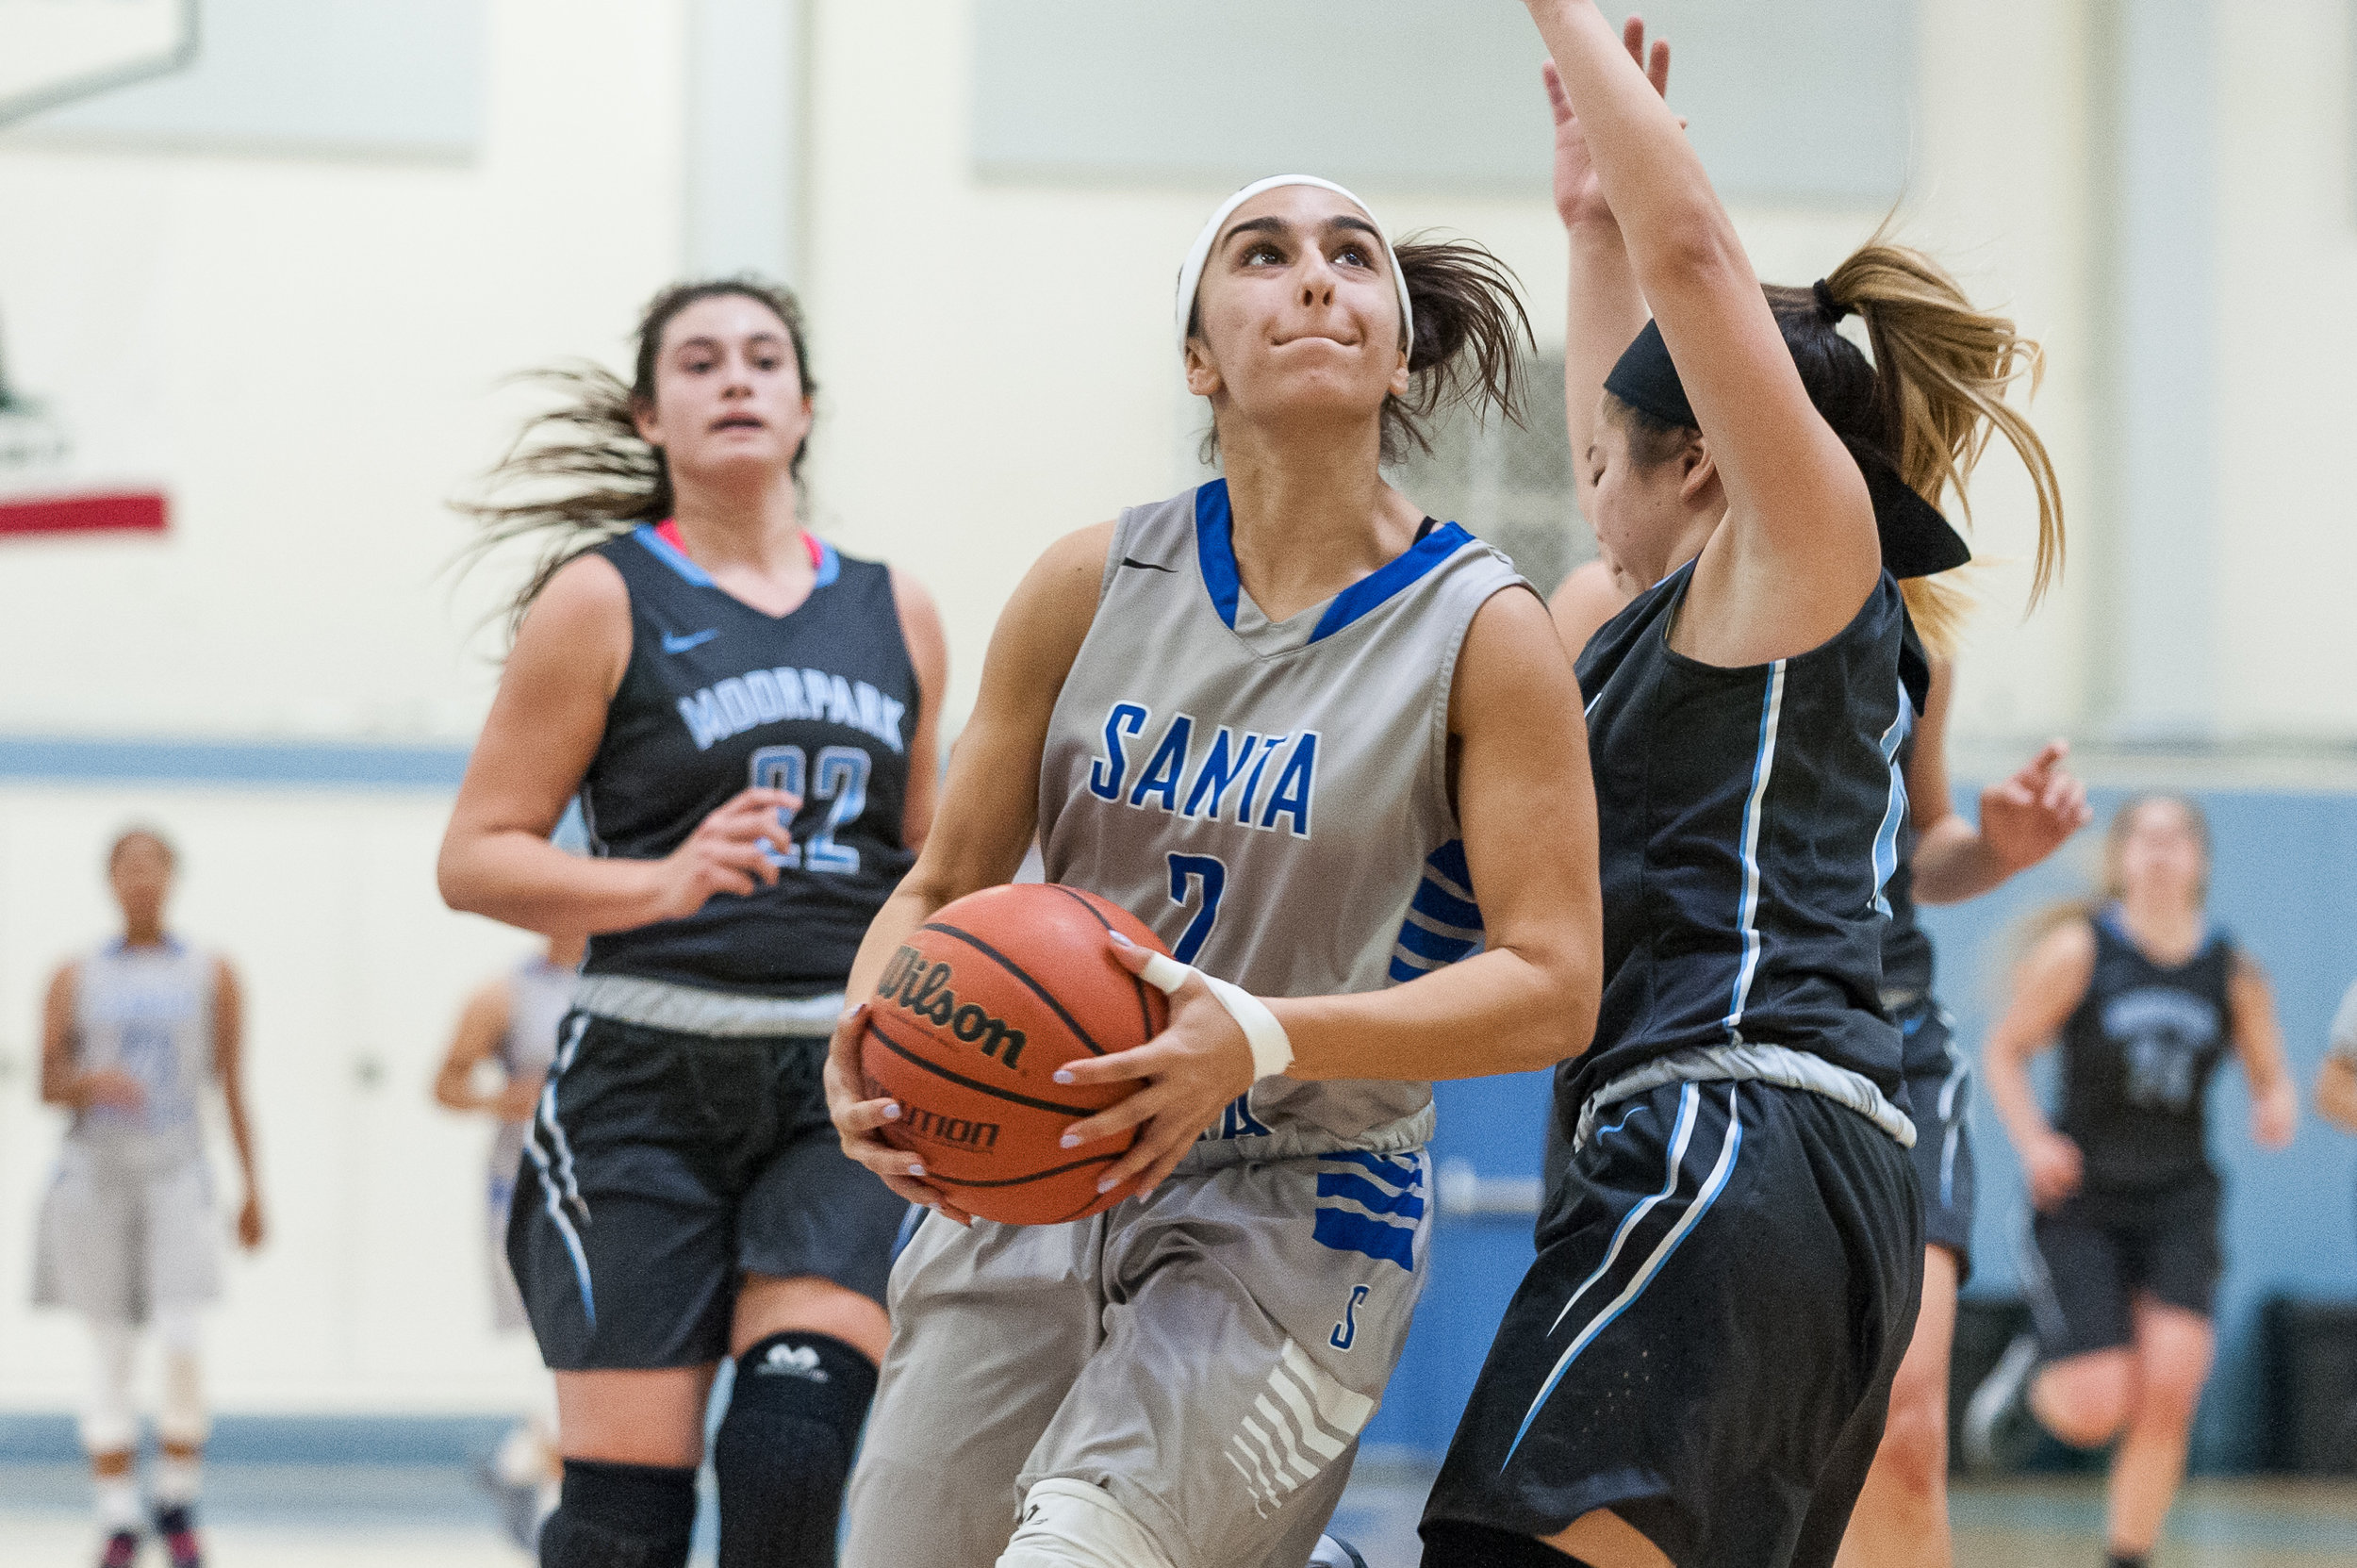  Guard Jessica Melamed (2) of Santa Monica College goes up for a contested layup during a fastbreak. The Santa Monica College Corsairs lose the game 52-69 to the Moorpark College Raiders. The game was held at the SMC Pavilion at the Santa Monica Coll